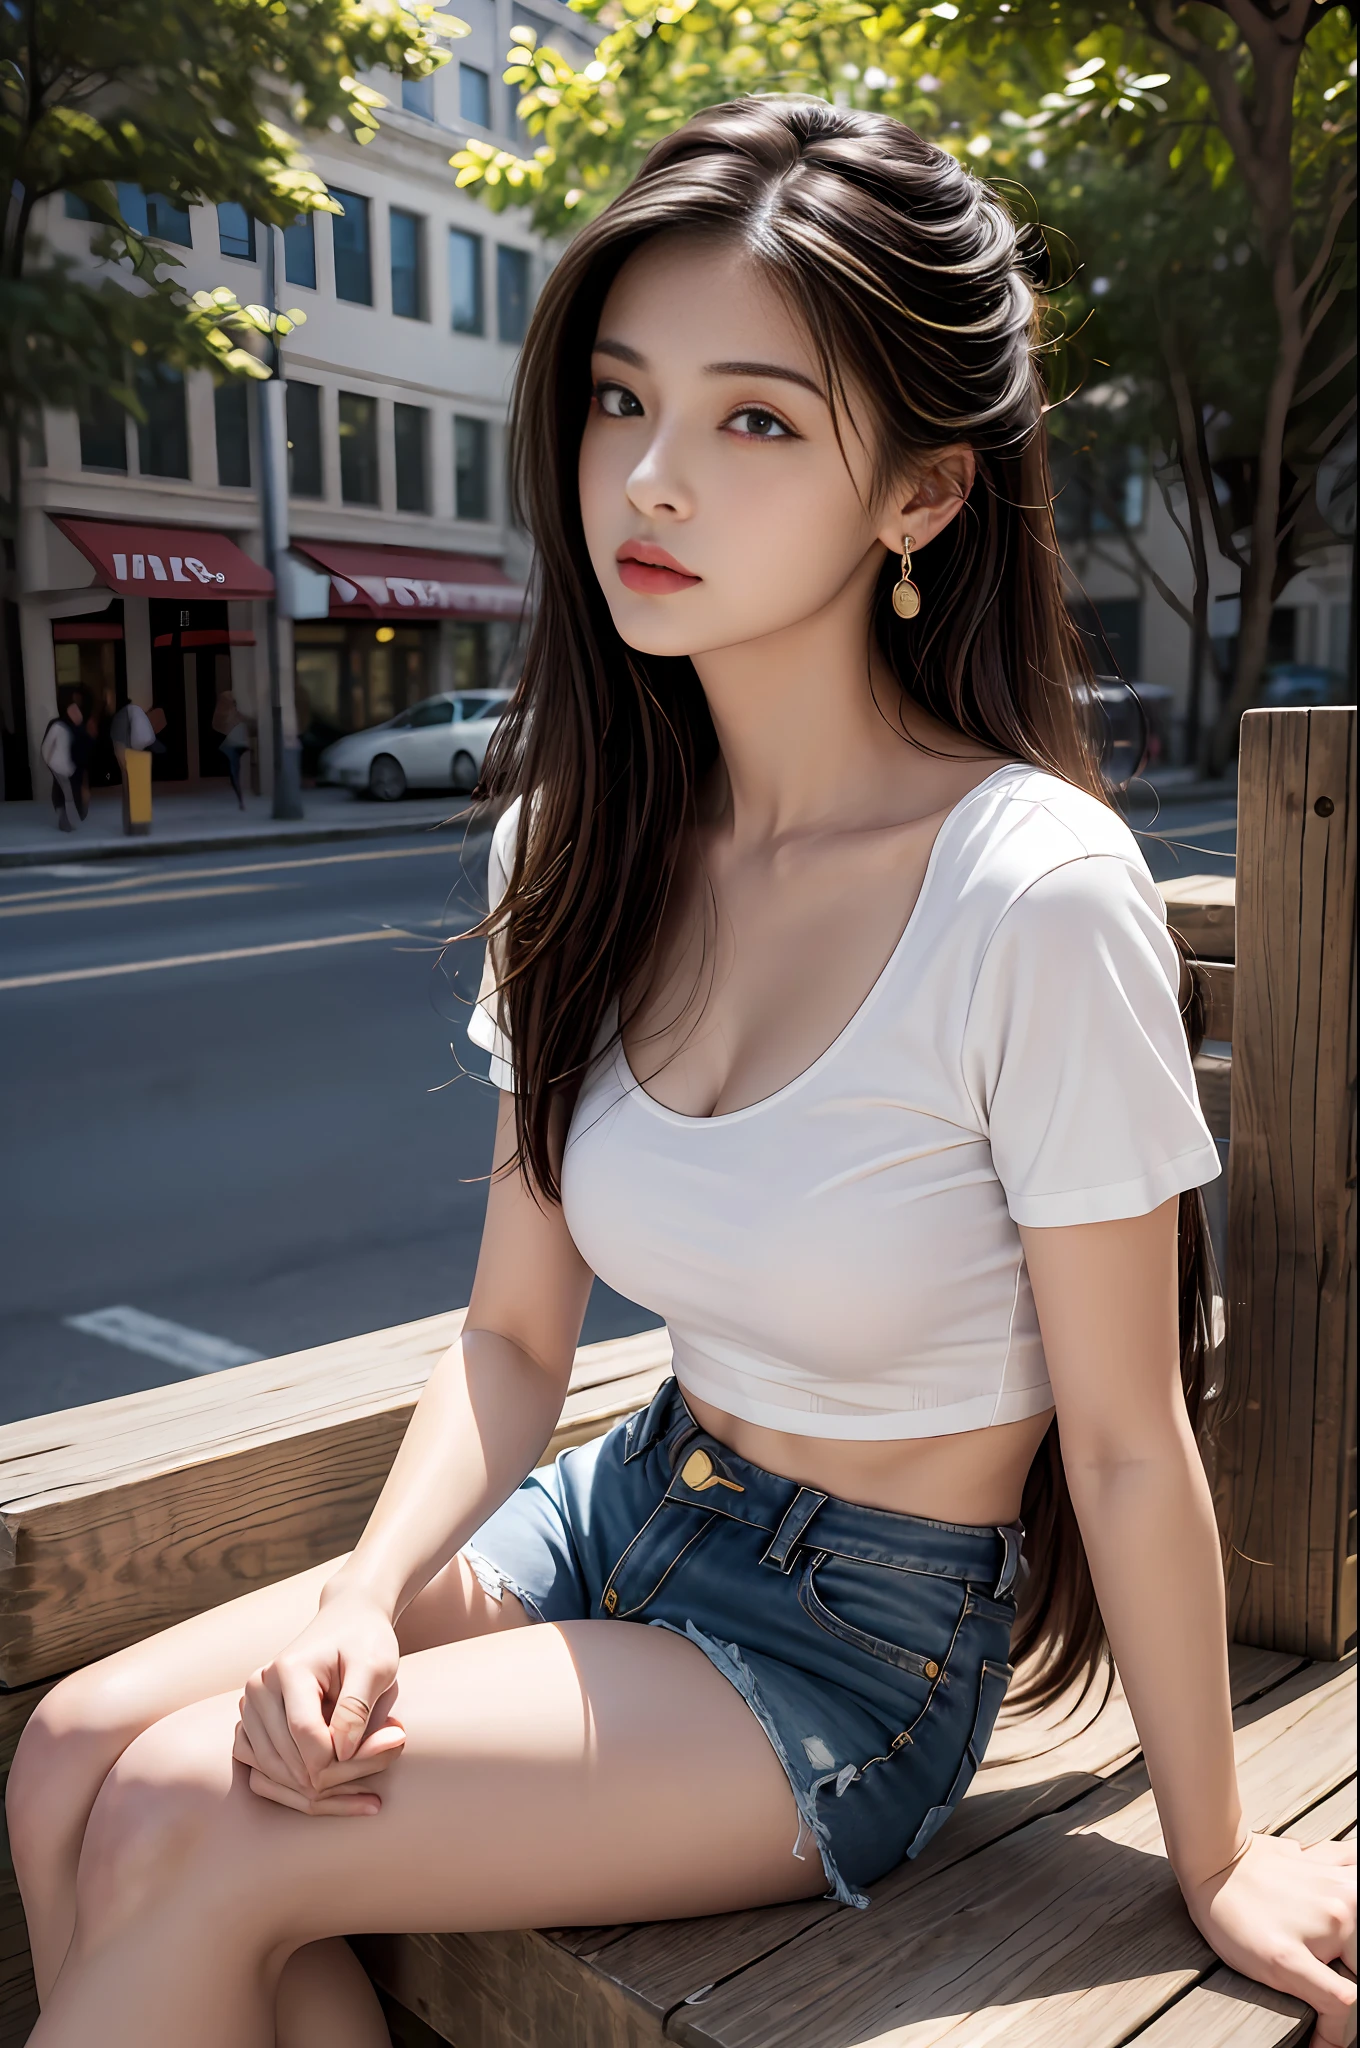 Best quality, masterpiece, super high resolution, (realistic: 1.4), original photo, (evening street), 1 girl, black eyes, looking at the audience, long hair, light makeup, lips, small ears, white t-shirt, denim shorts, earrings, sitting Ferrari, big breasts, slim